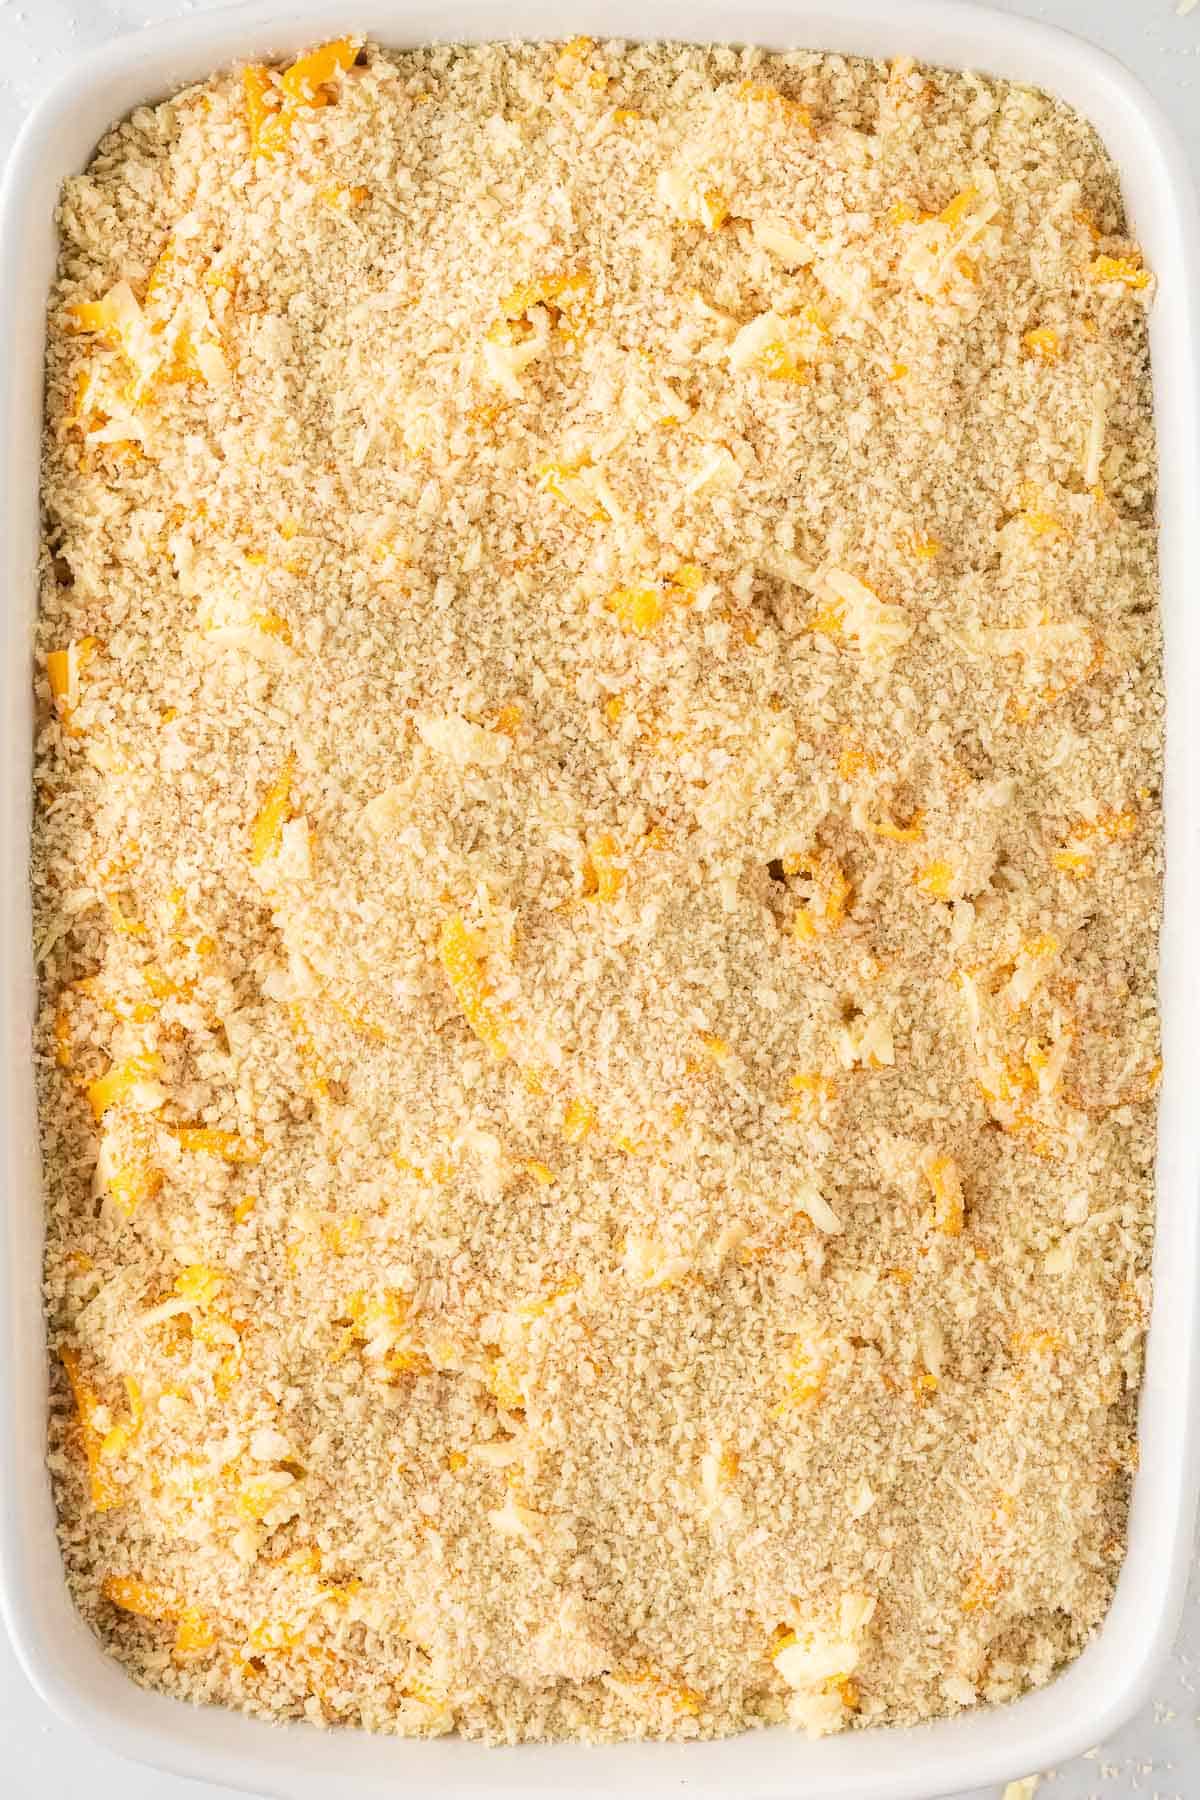 panko topping added to the top of the baked mac and cheese